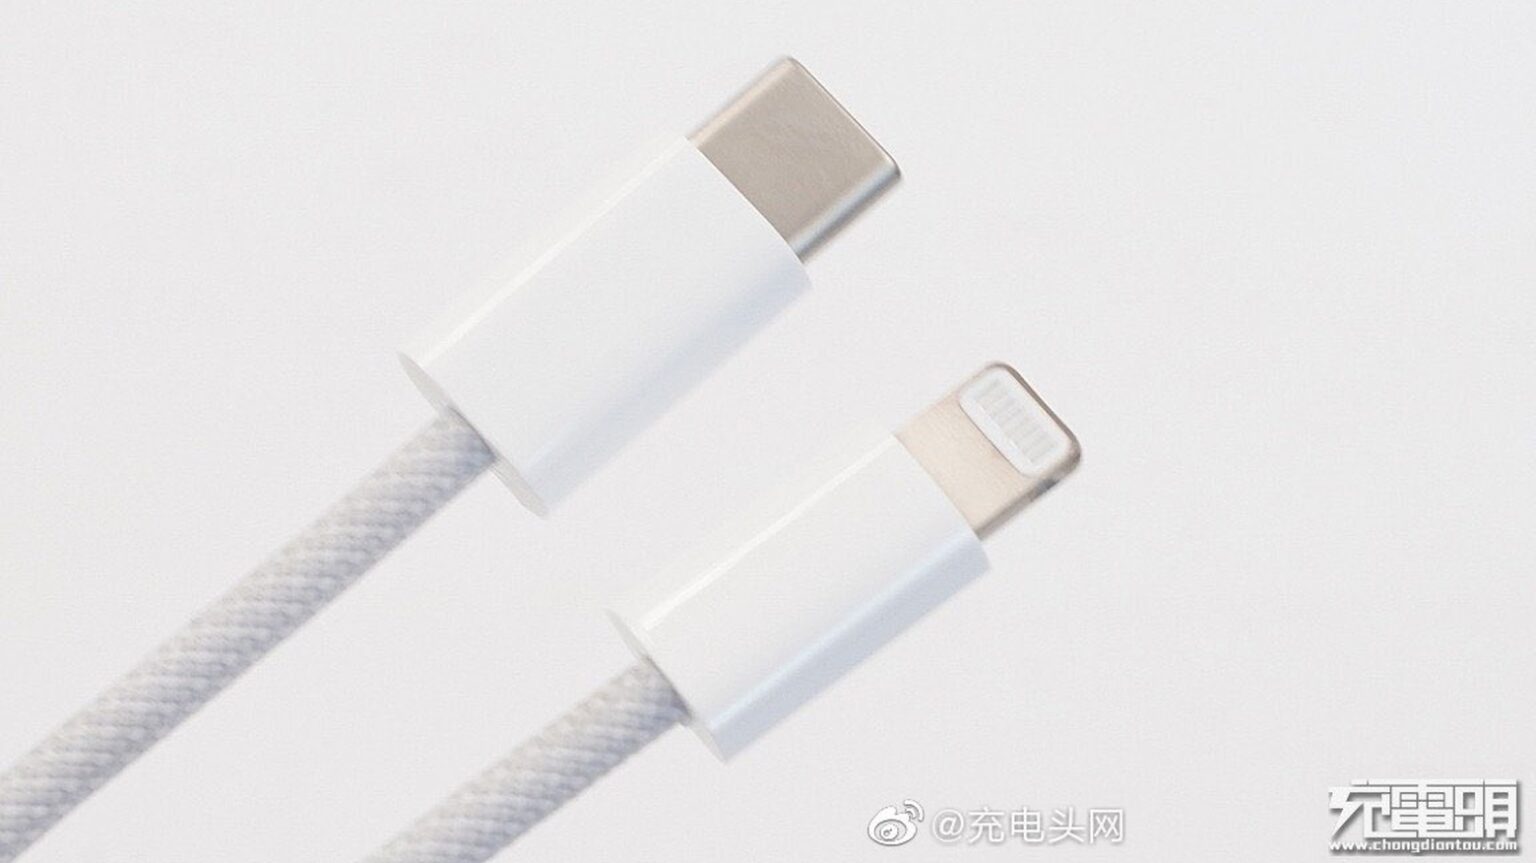 This might be a glimpse of the iPhone 12 cable.